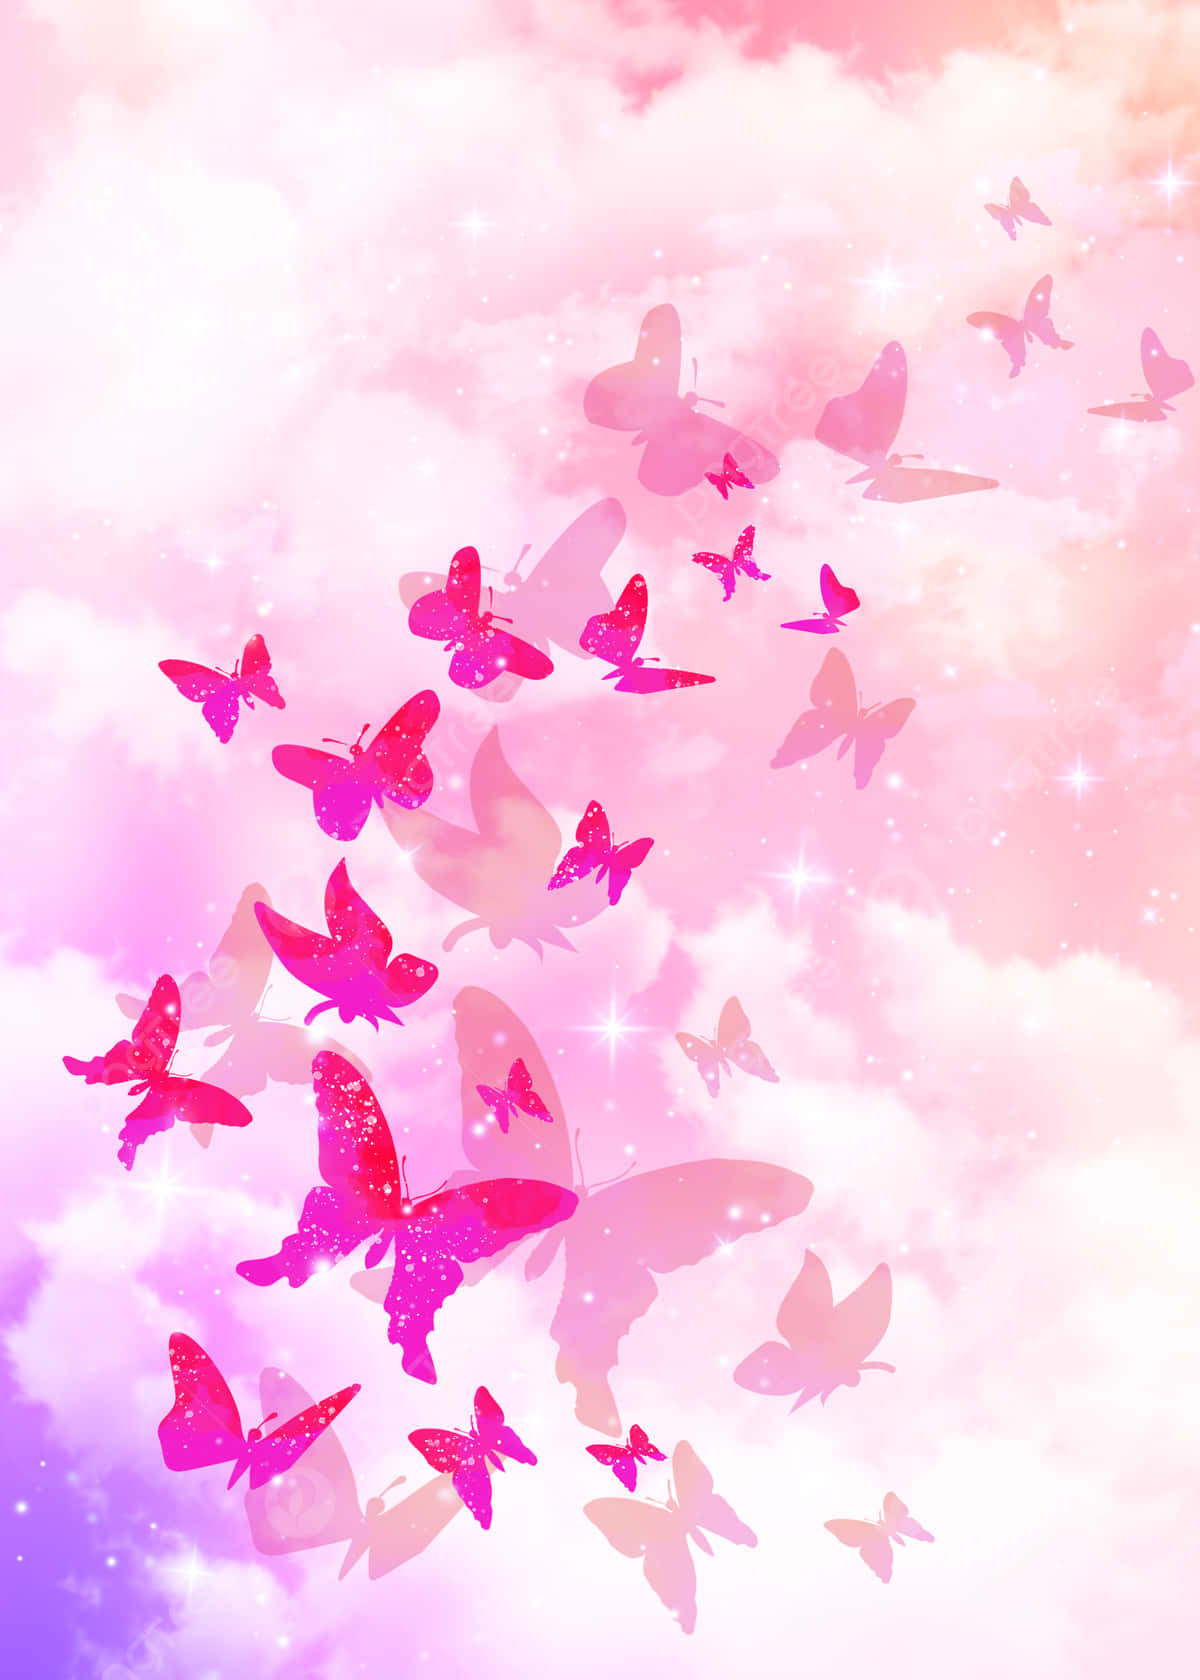 Red Butterfly On Clouds Wallpaper